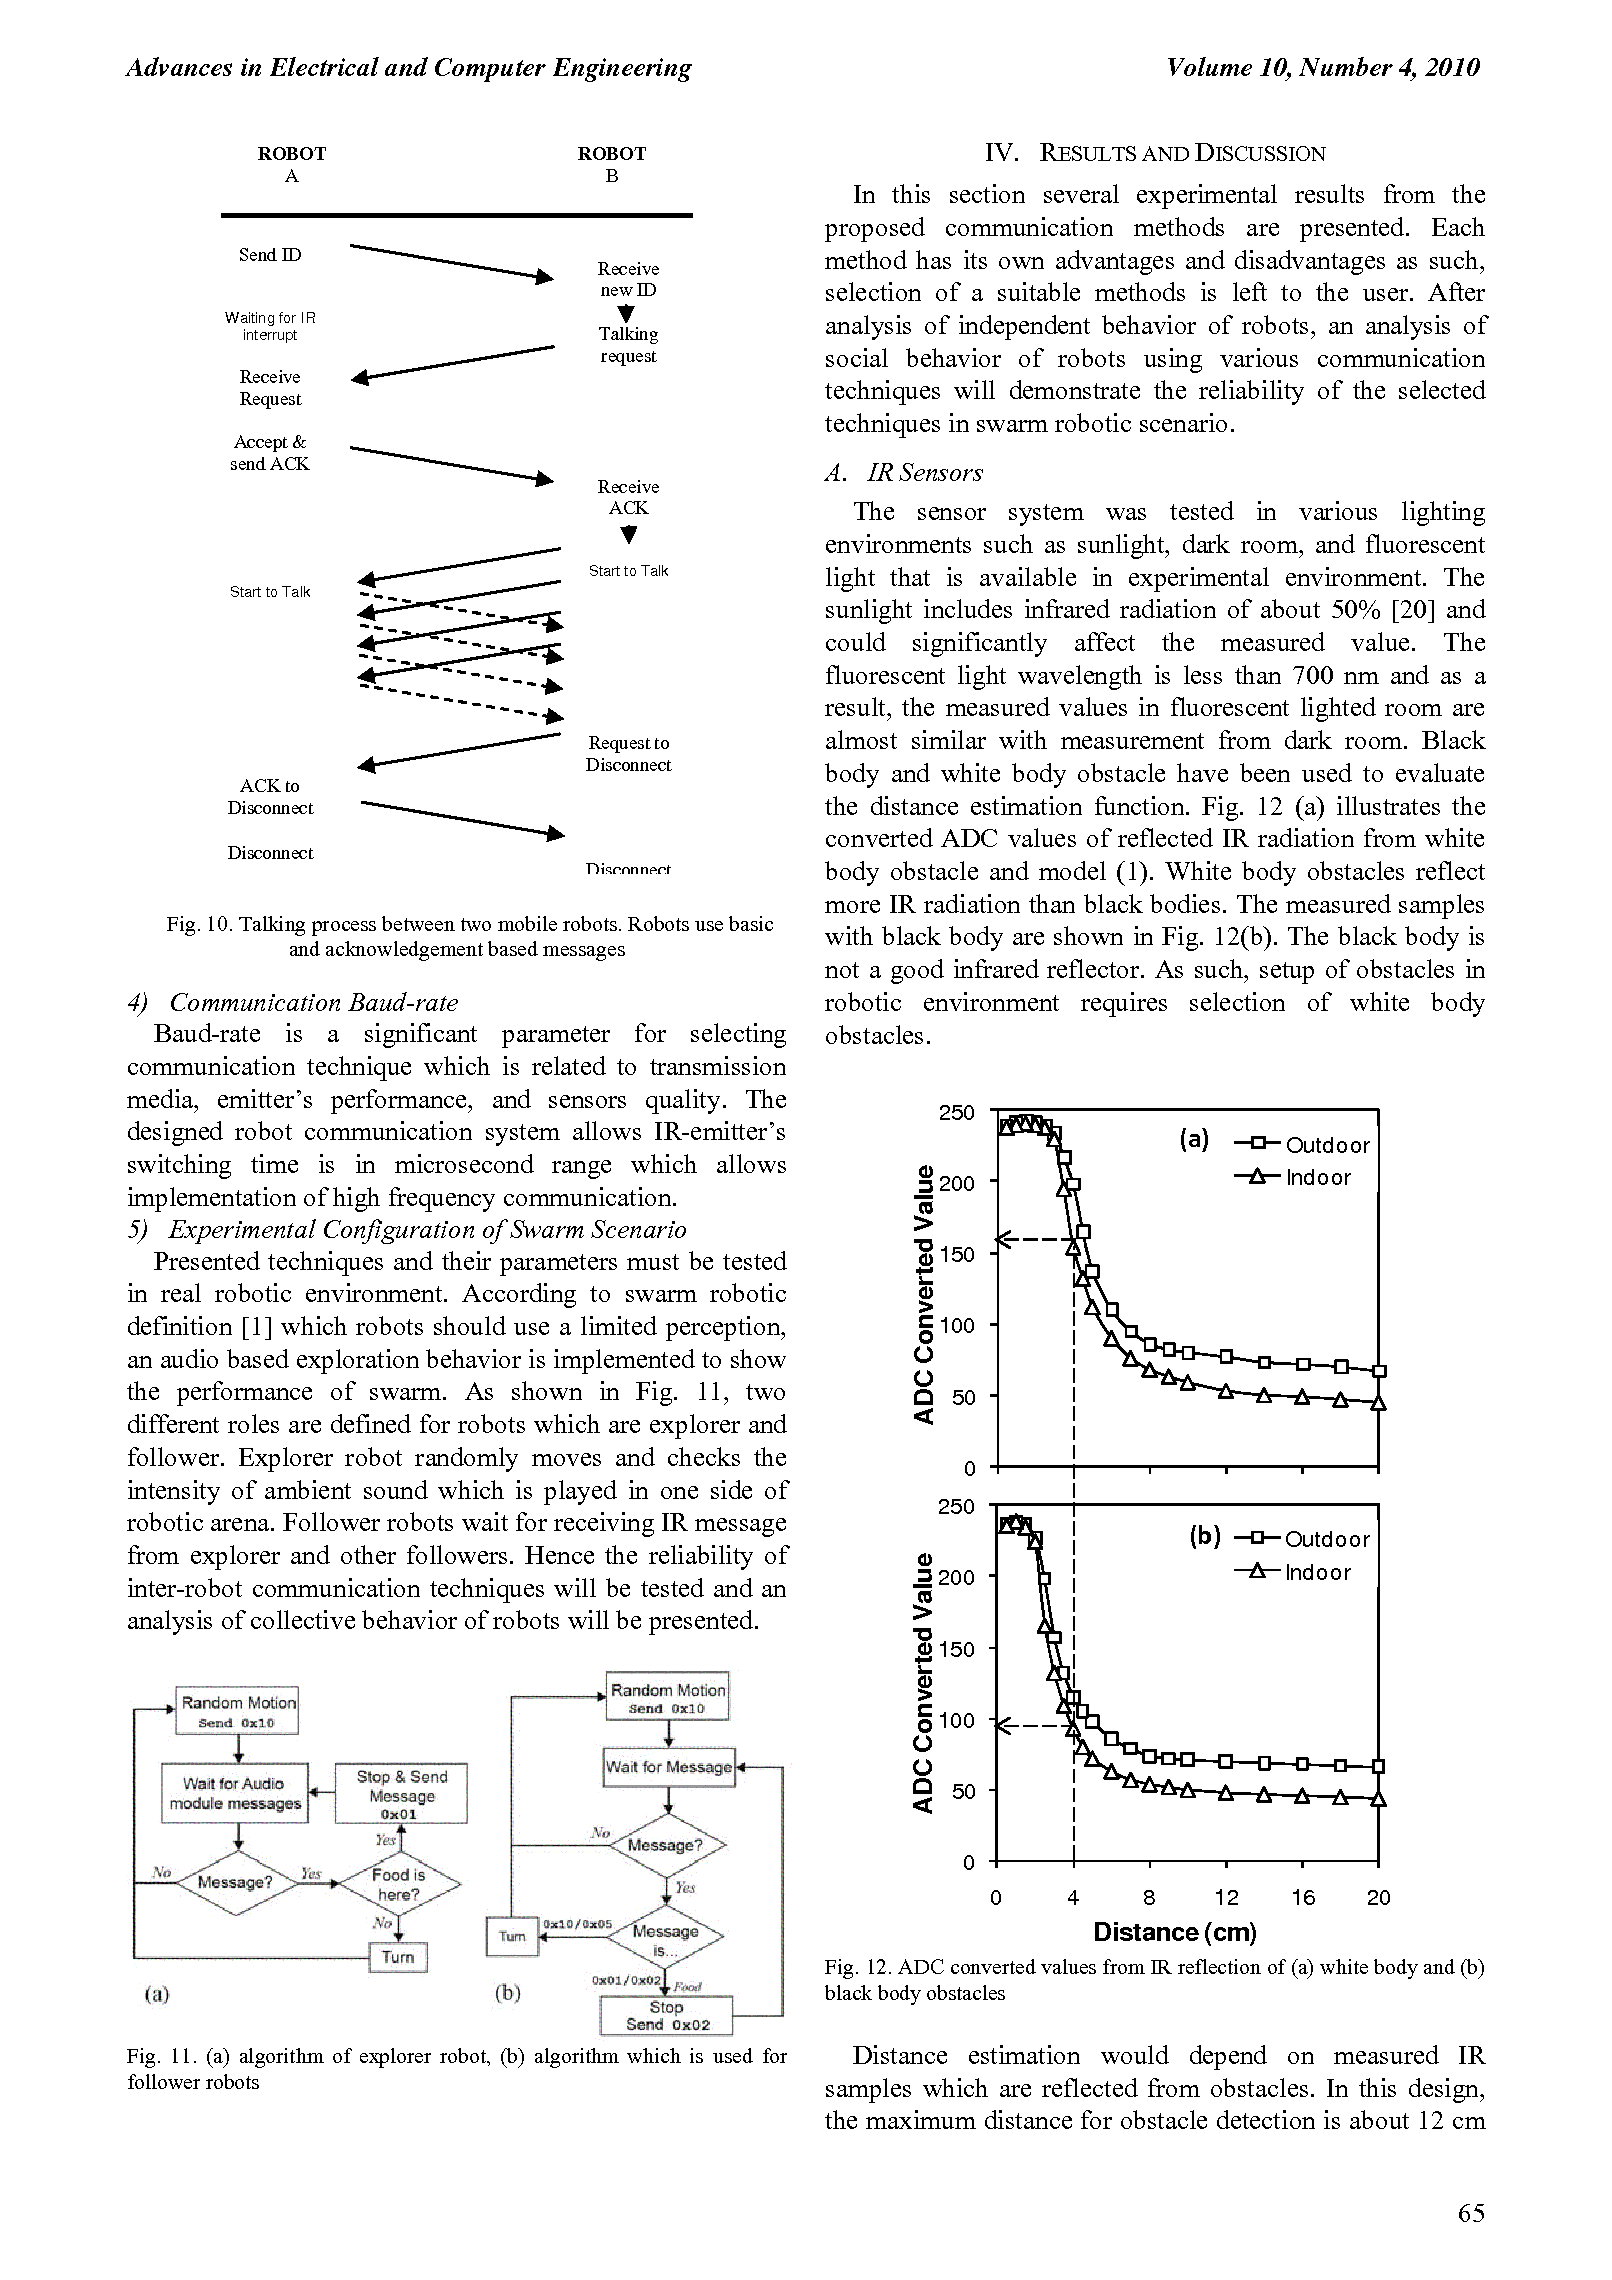 PDF Quickview for paper with DOI:10.4316/AECE.2010.04010